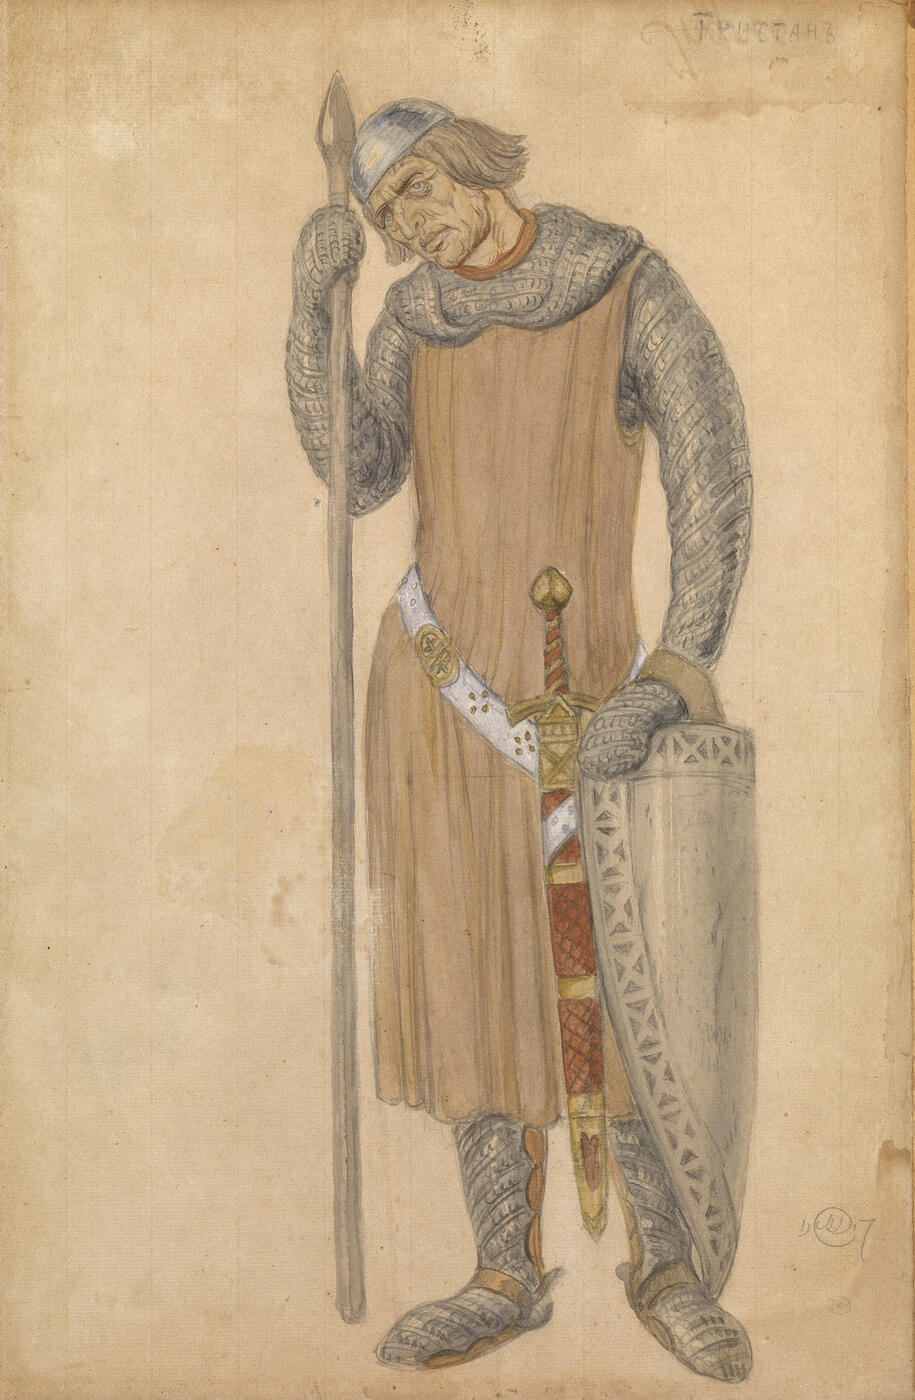 Tristan, Costume Design for  R. Wagner’s Opera “Tristan and Isolde”